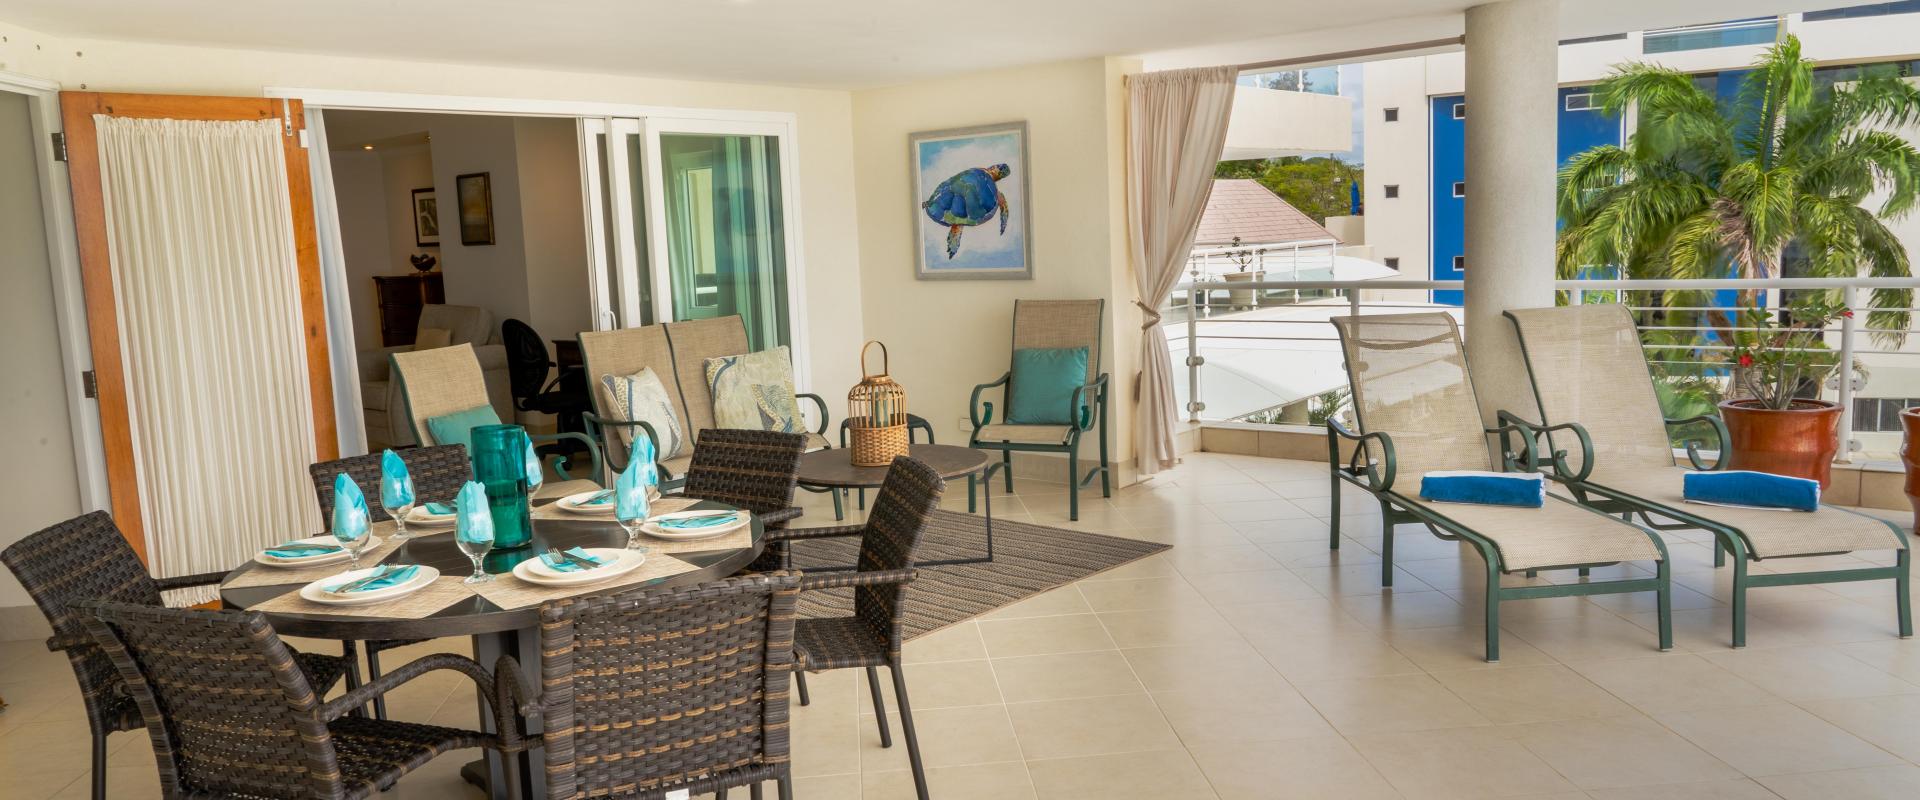 Beachfront Holiday Rental Barbados Palm Beach 410 Outside Patio Dining Area